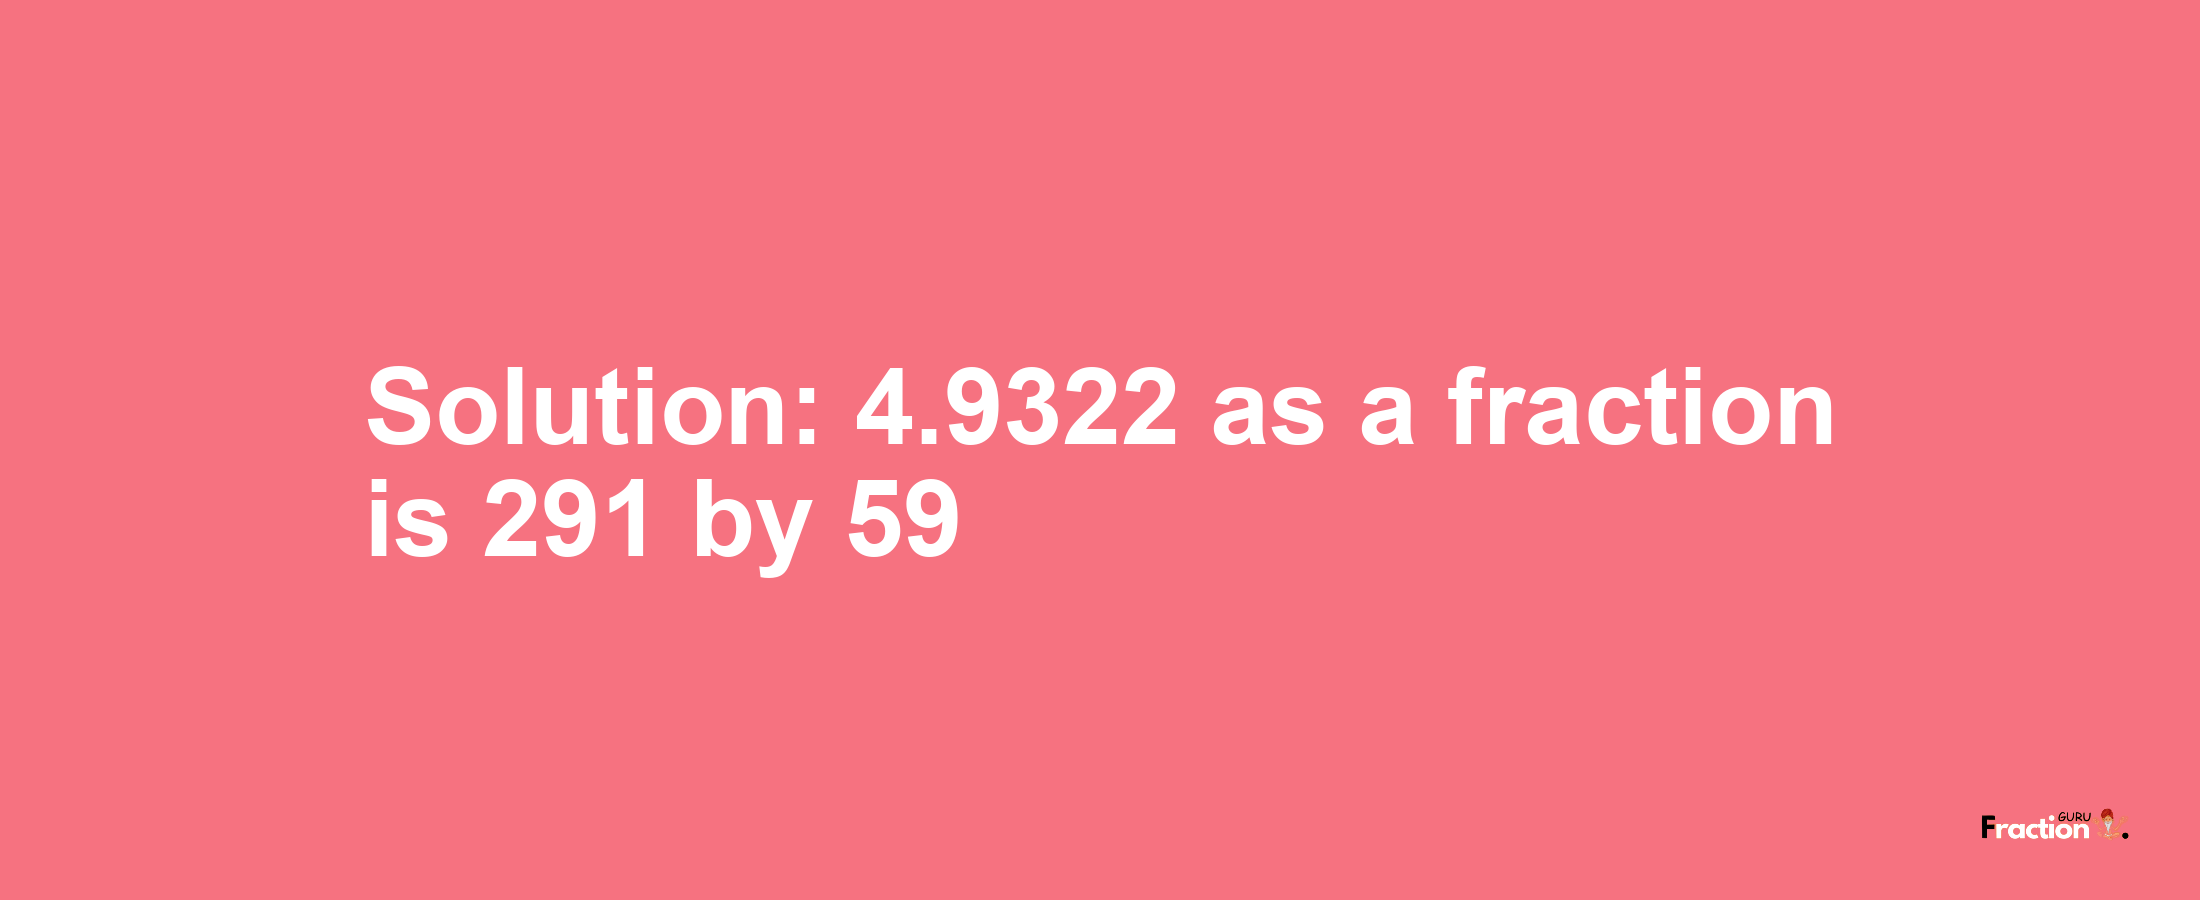 Solution:4.9322 as a fraction is 291/59